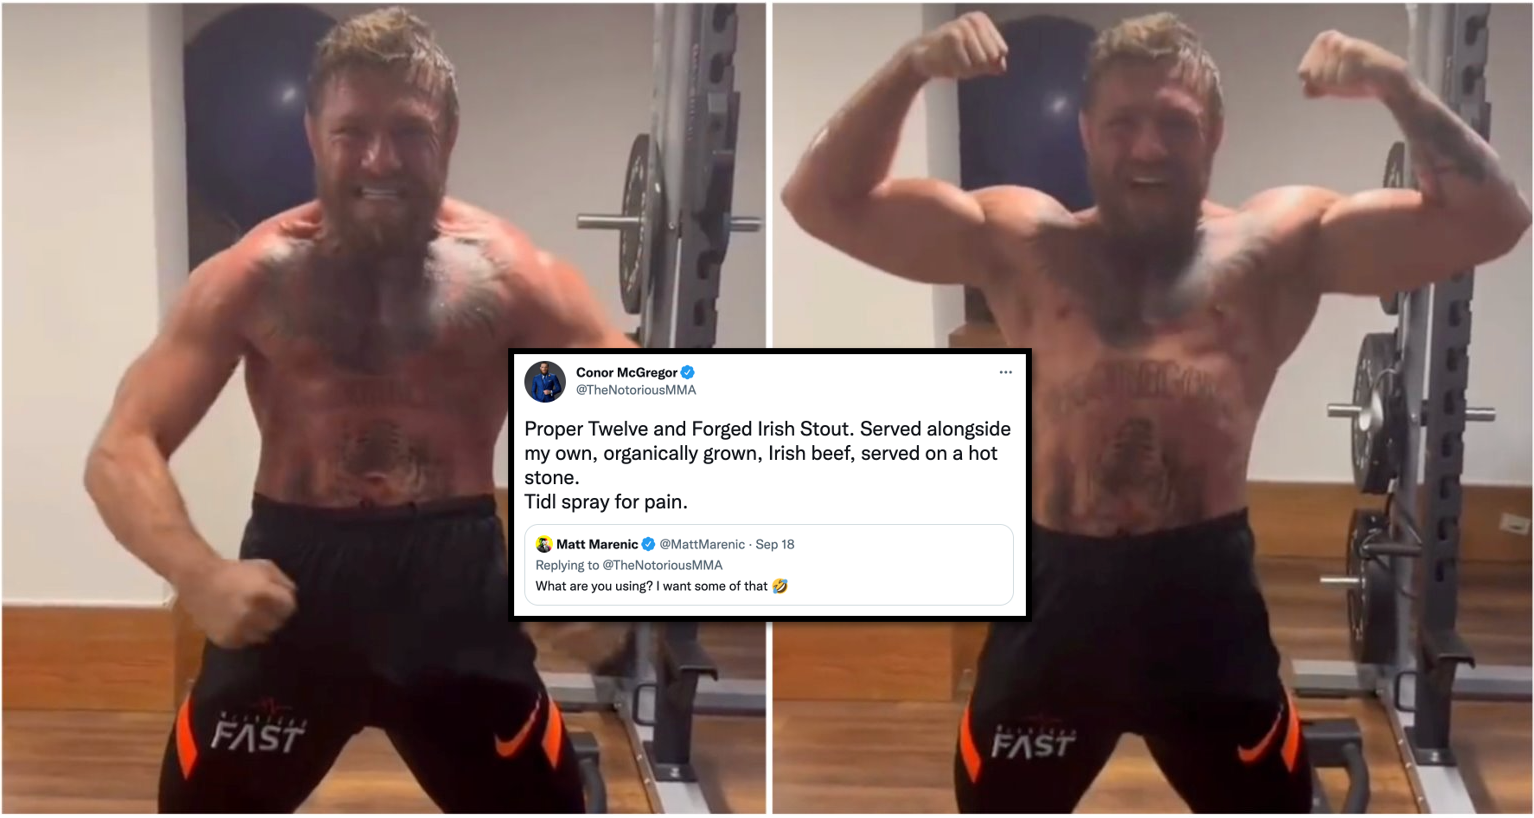 Conor McGregor responds to steroids accusation during UFC absence